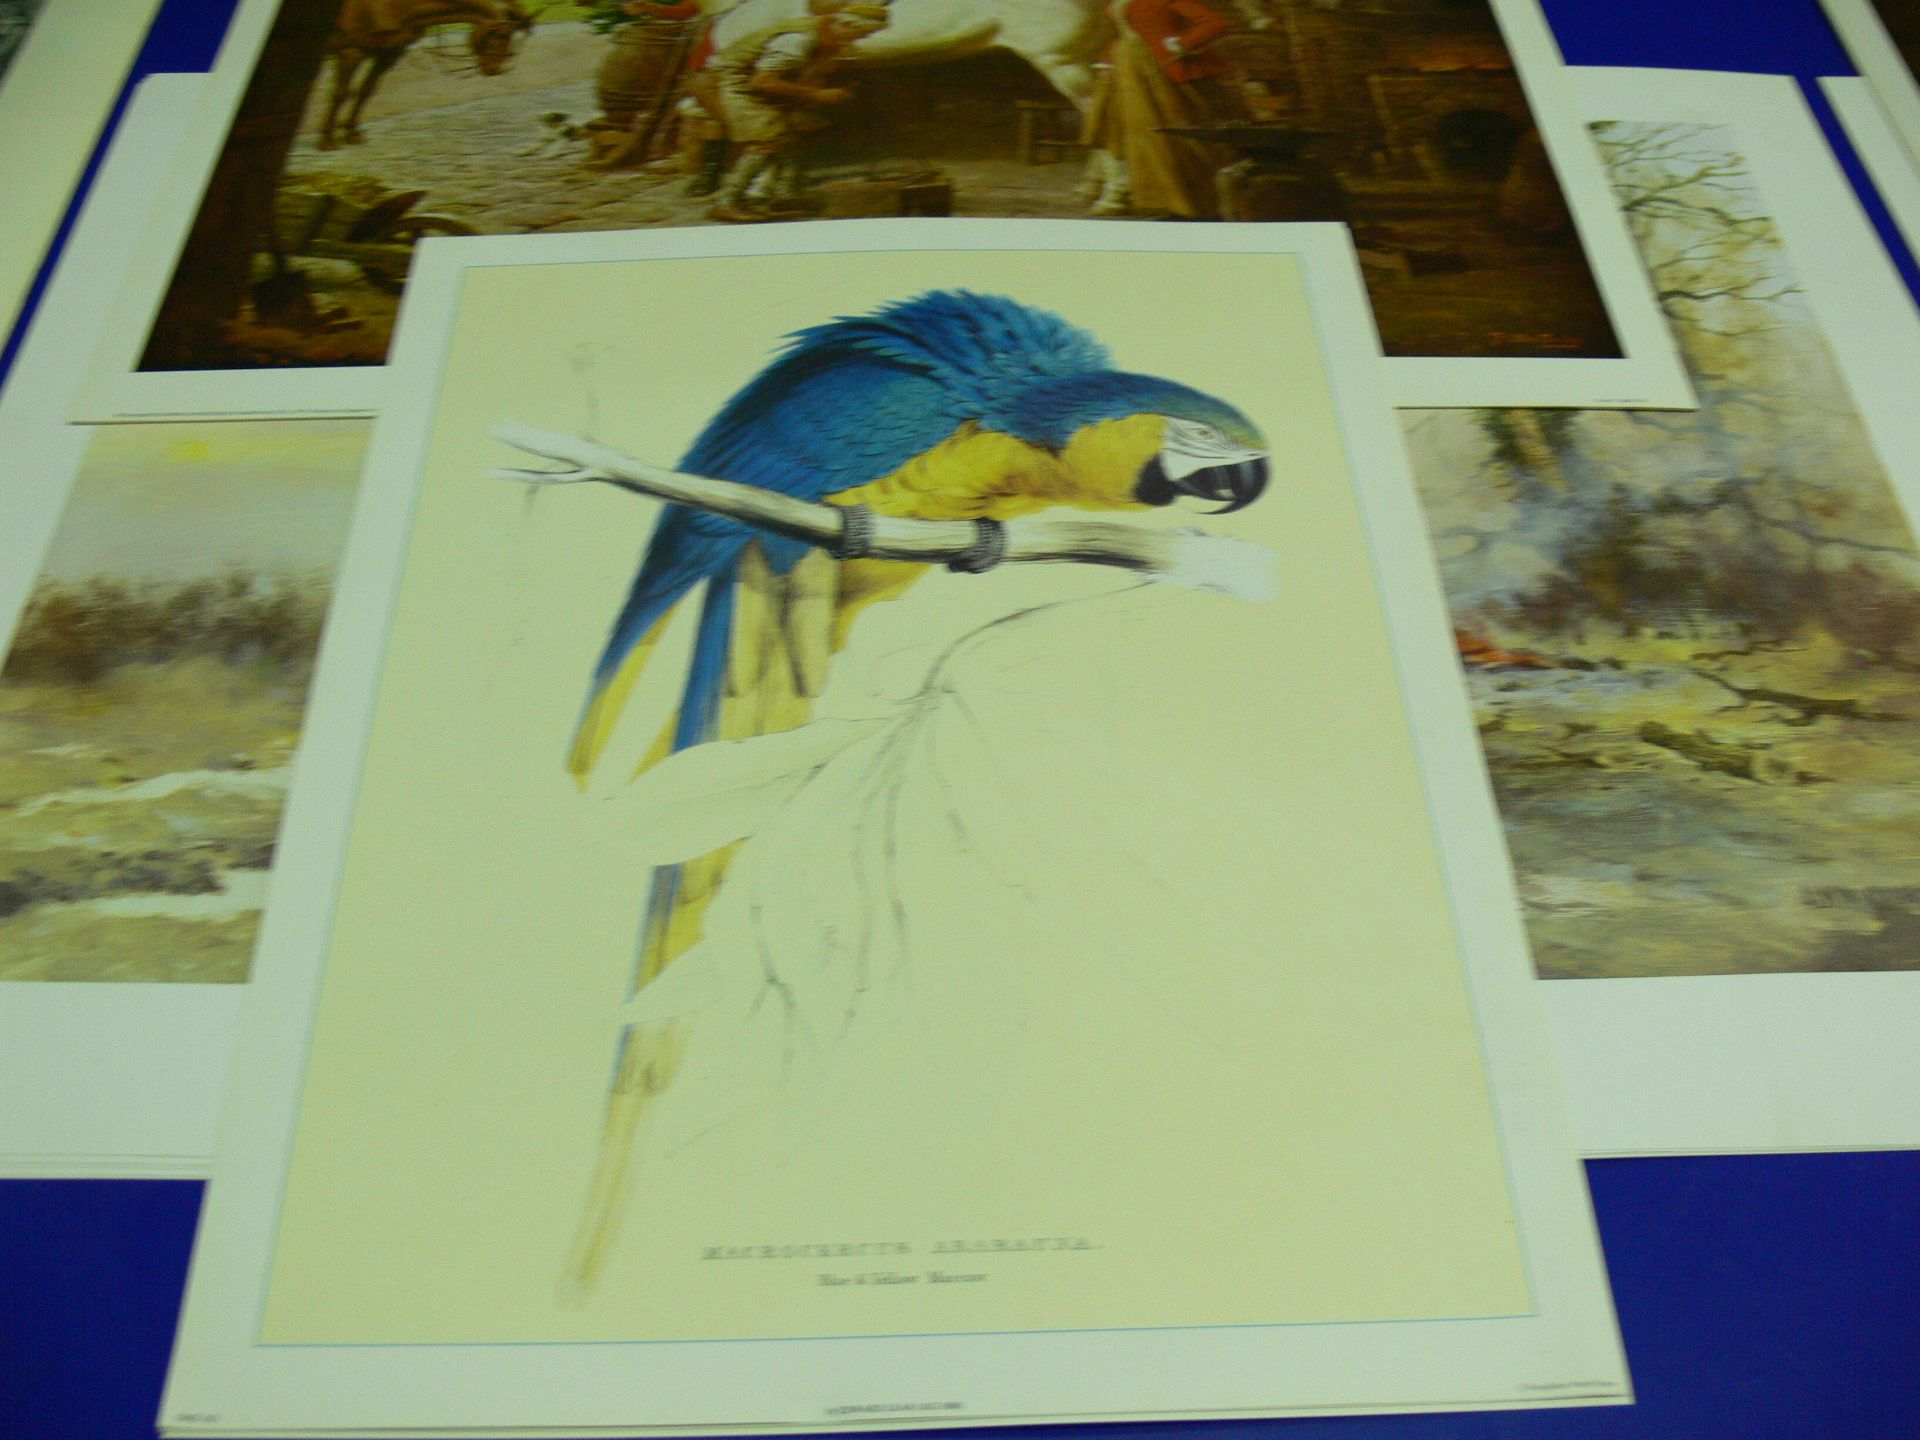 Five copies each of three coloured prints. 'The Forge' by Fortunino Matania (47cm x 56cm), 'Clearing - Image 2 of 8